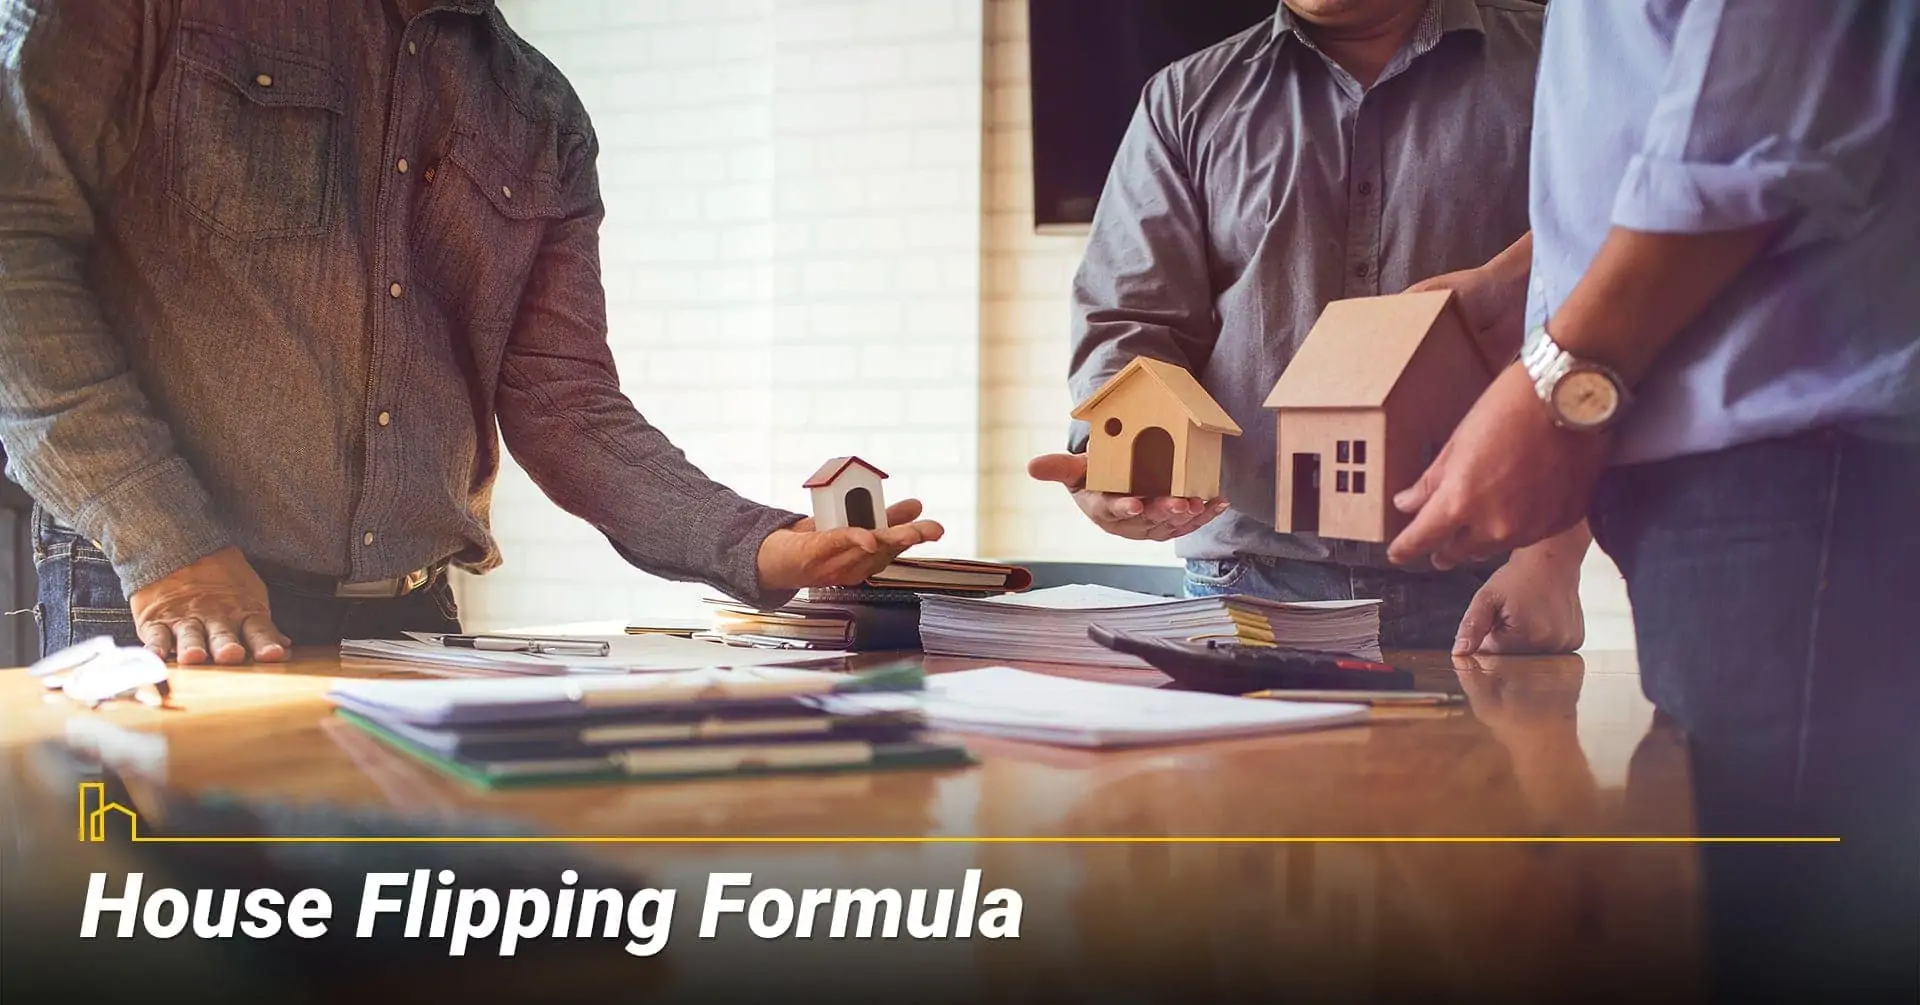 House Flipping Formula, follow steps to flip a house